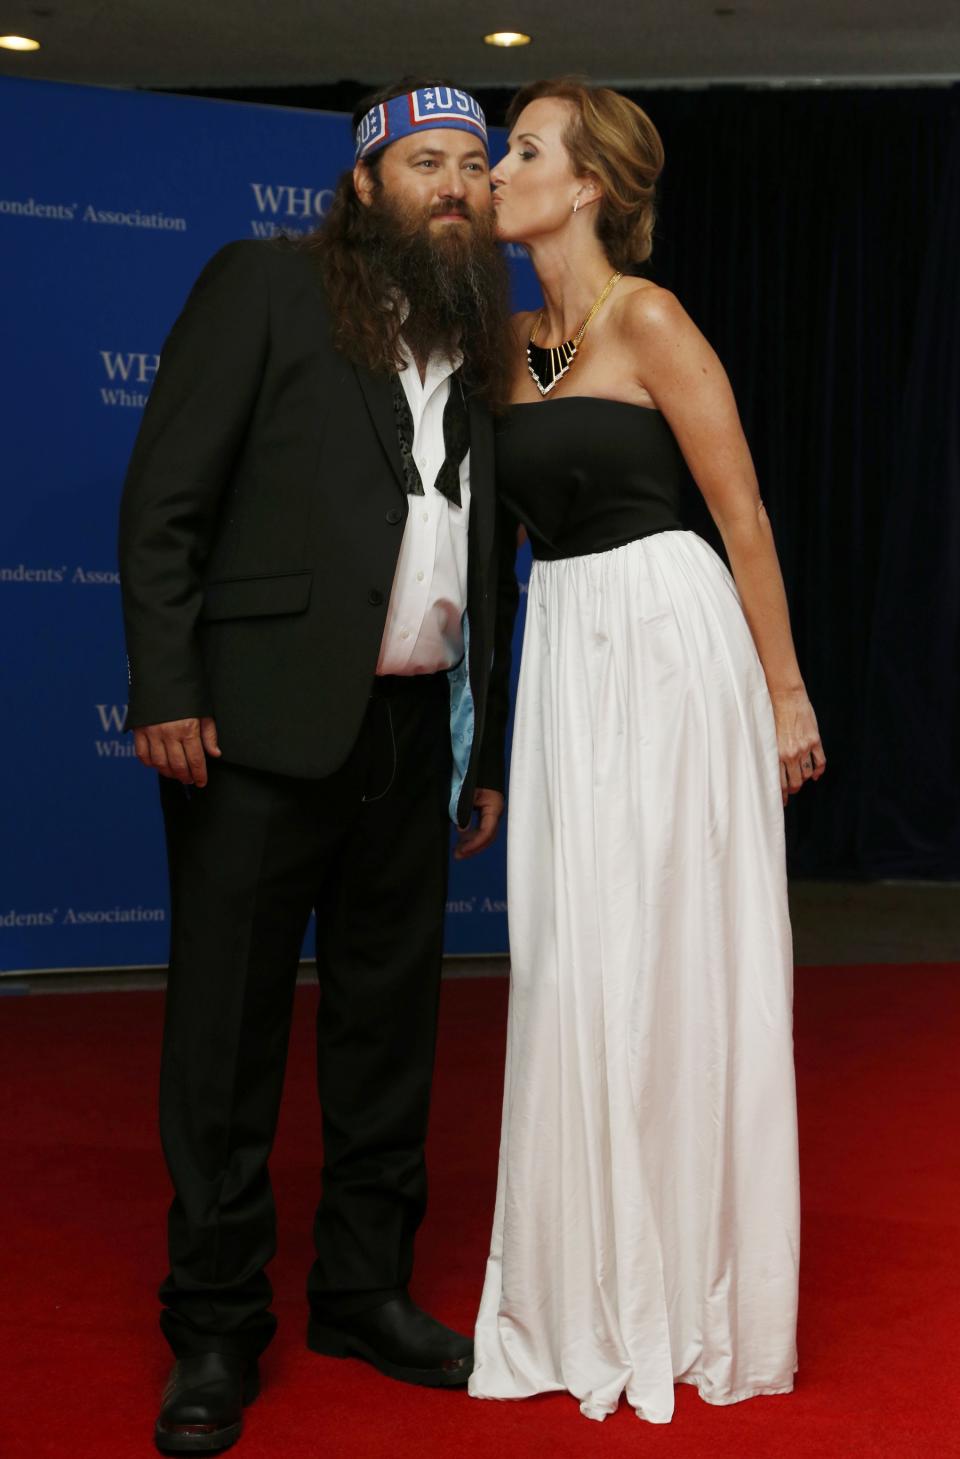 Willie and Korie Robertson arrive on the red carpet at the annual White House Correspondents' Association Dinner in Washington, May 3, 2014. (REUTERS/Jonathan Ernst)